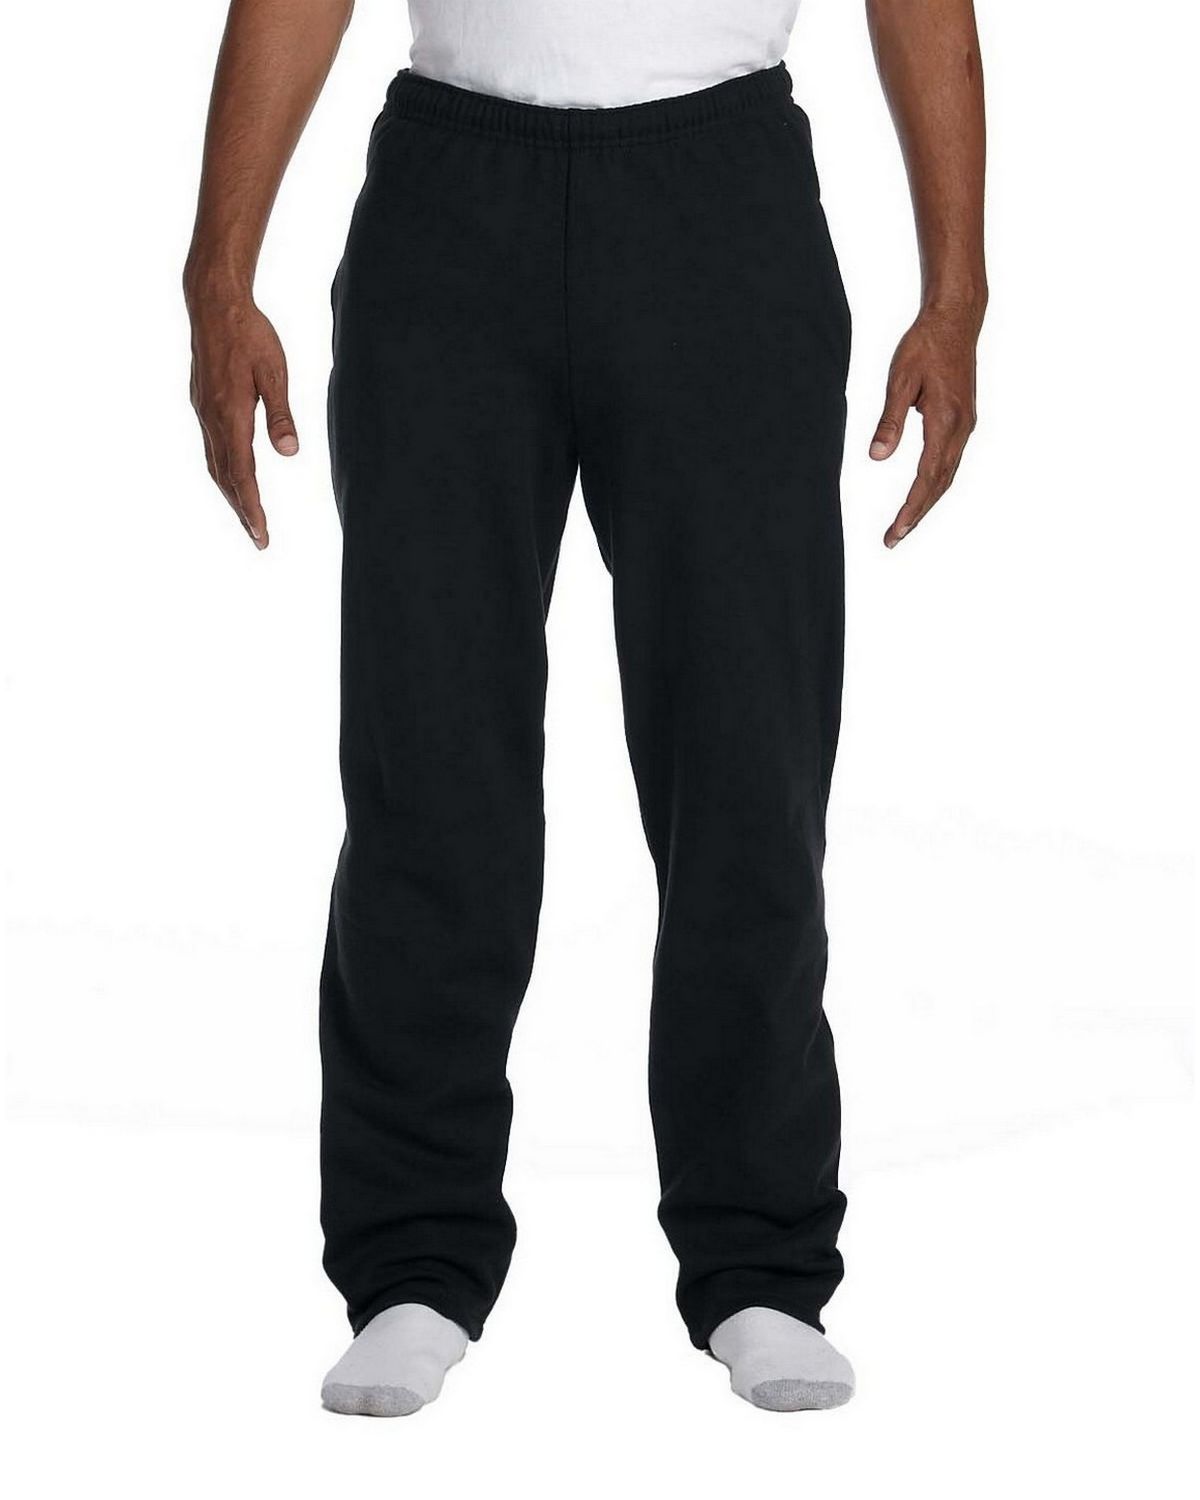 Fruit of the Loom 51300R 8 oz. Best 50/50 Fleece Pant with Mesh Pockets ...